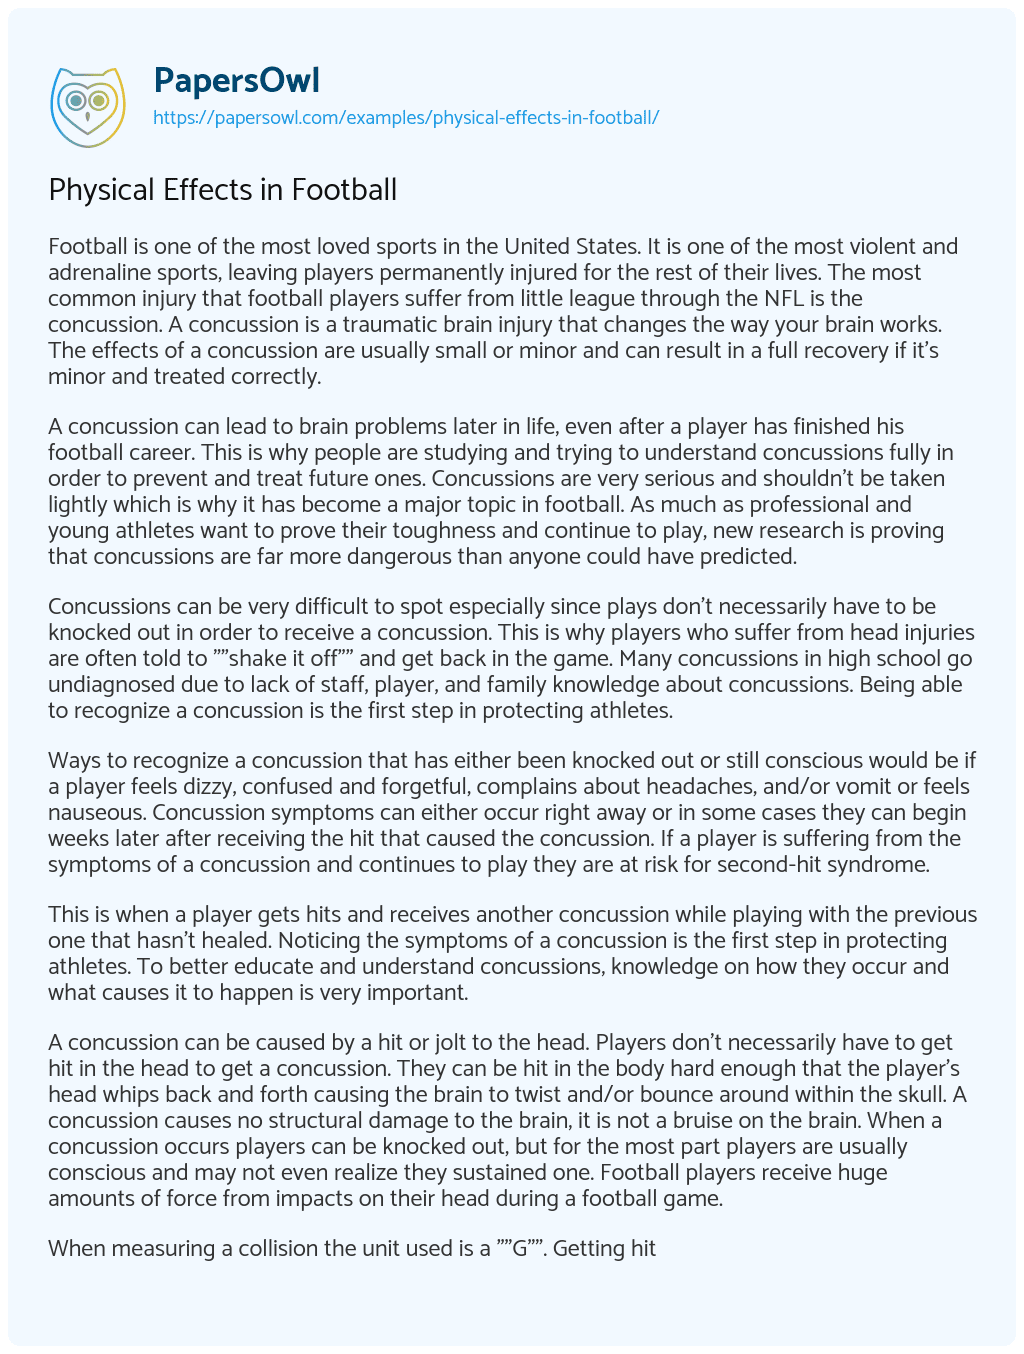 Essay on Physical Effects in Football